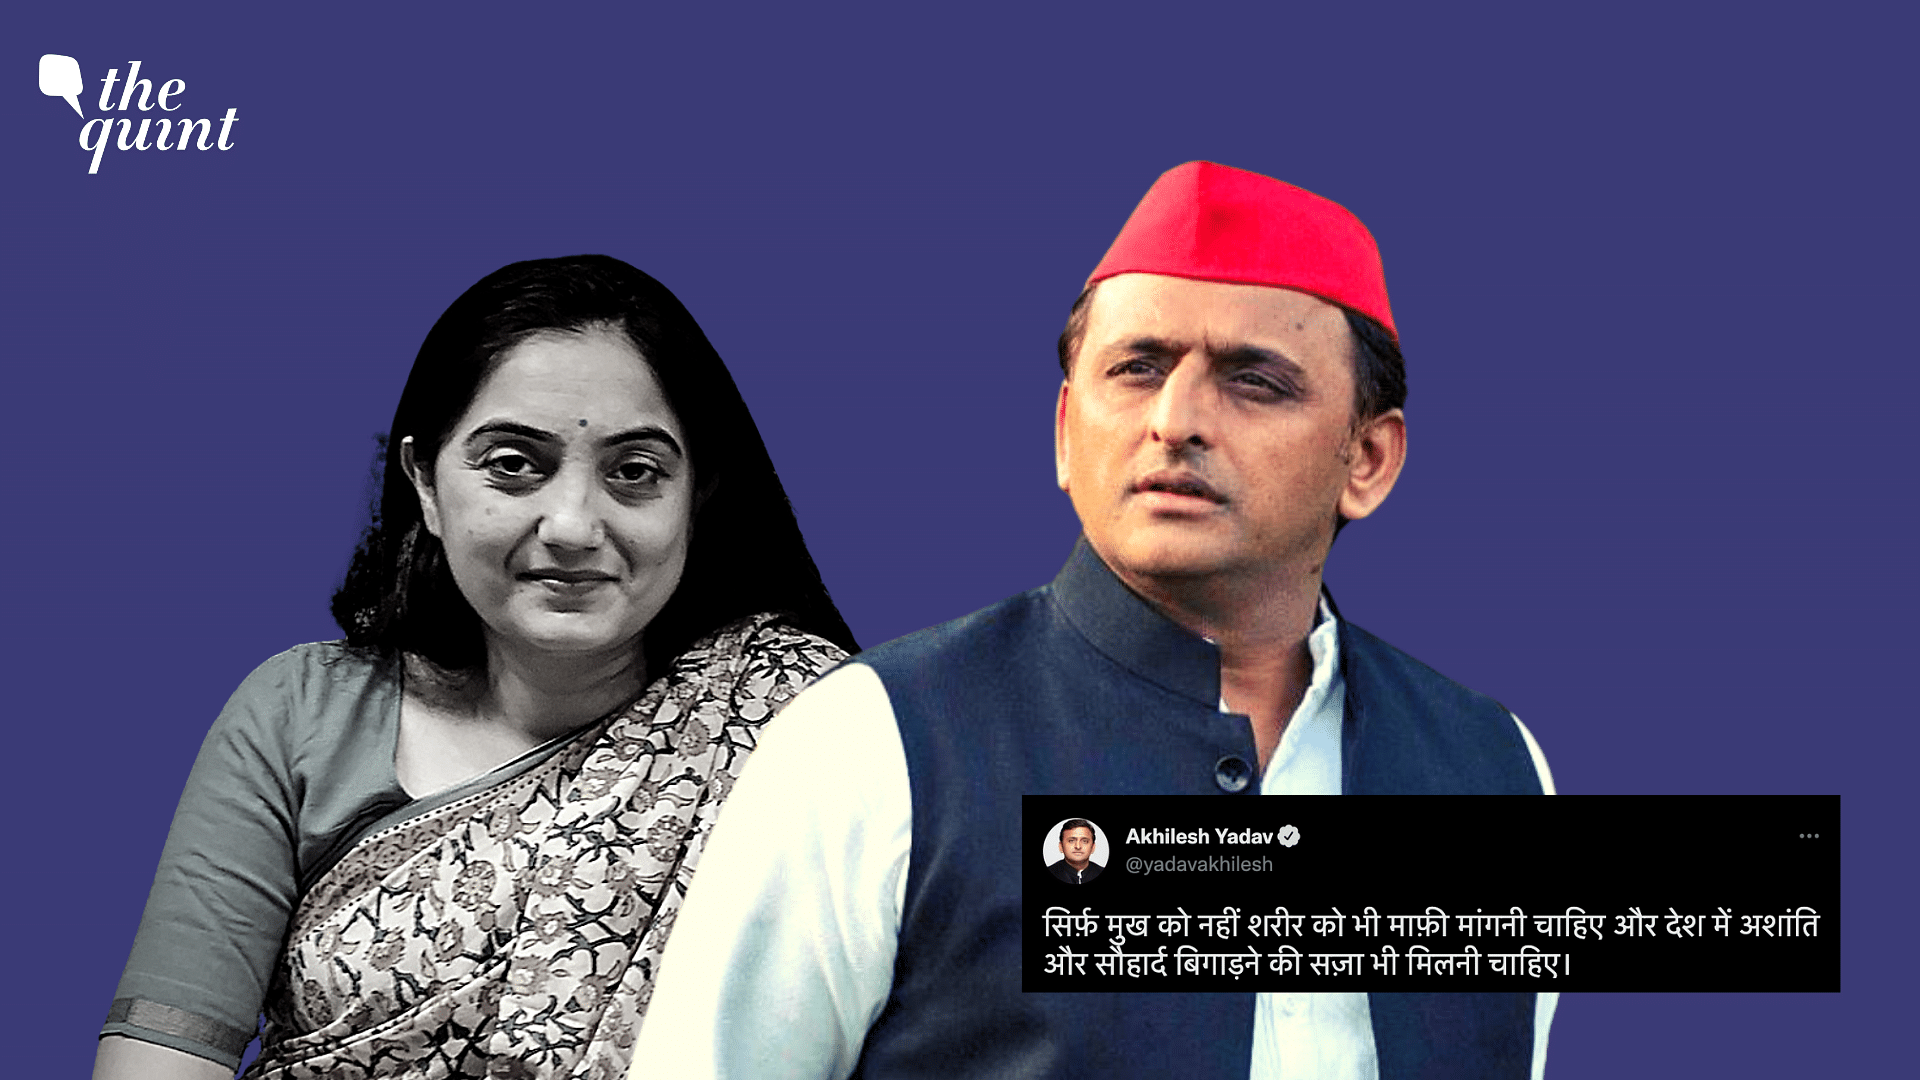 <div class="paragraphs"><p>Samajwadi Party chief Akhilesh Yadav had said in a tweet on Friday, 1 July, that it is not enough for only Nupur Sharma to apologise for her comments on Prophet Muhammad, and that the saffron party must also apologise  with her.</p></div>